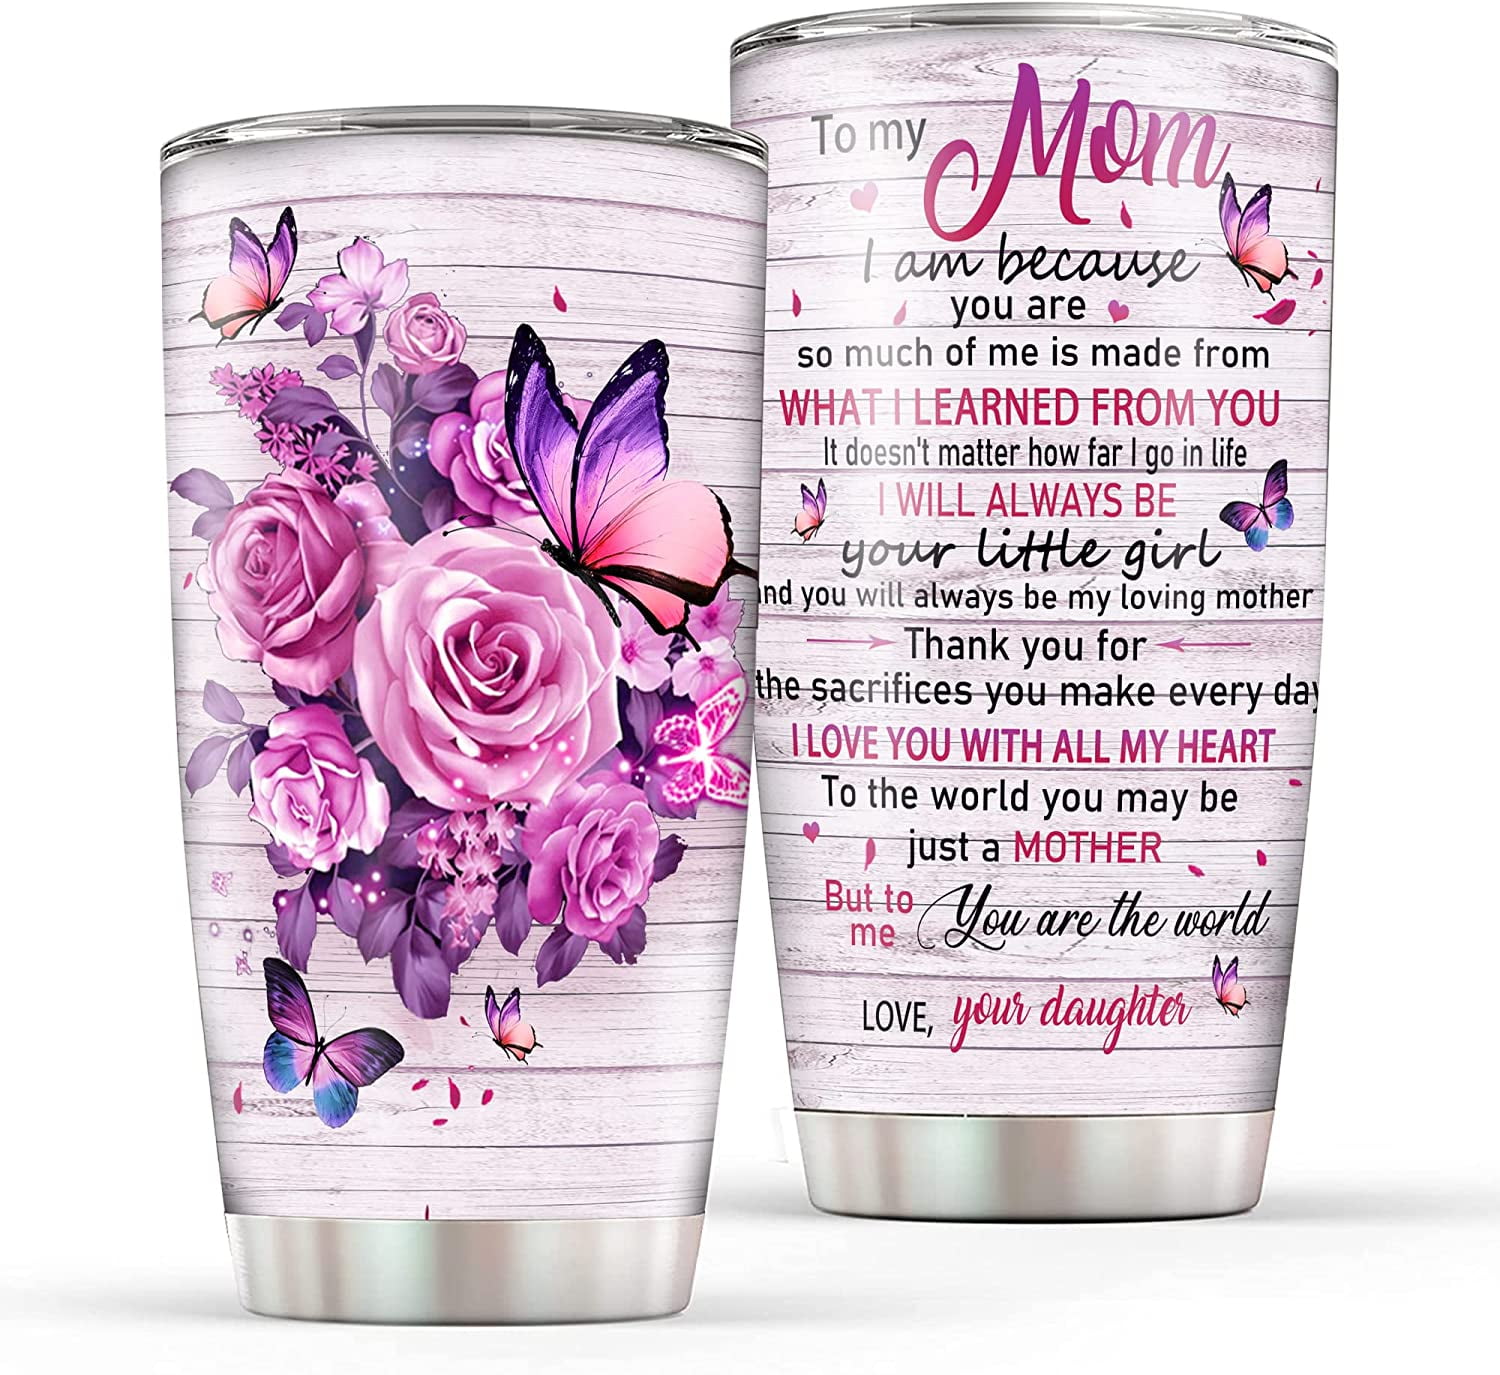 The best mama - Personalized Mother's Day or Birthday gift for Mom - C – My  Mindful Gifts